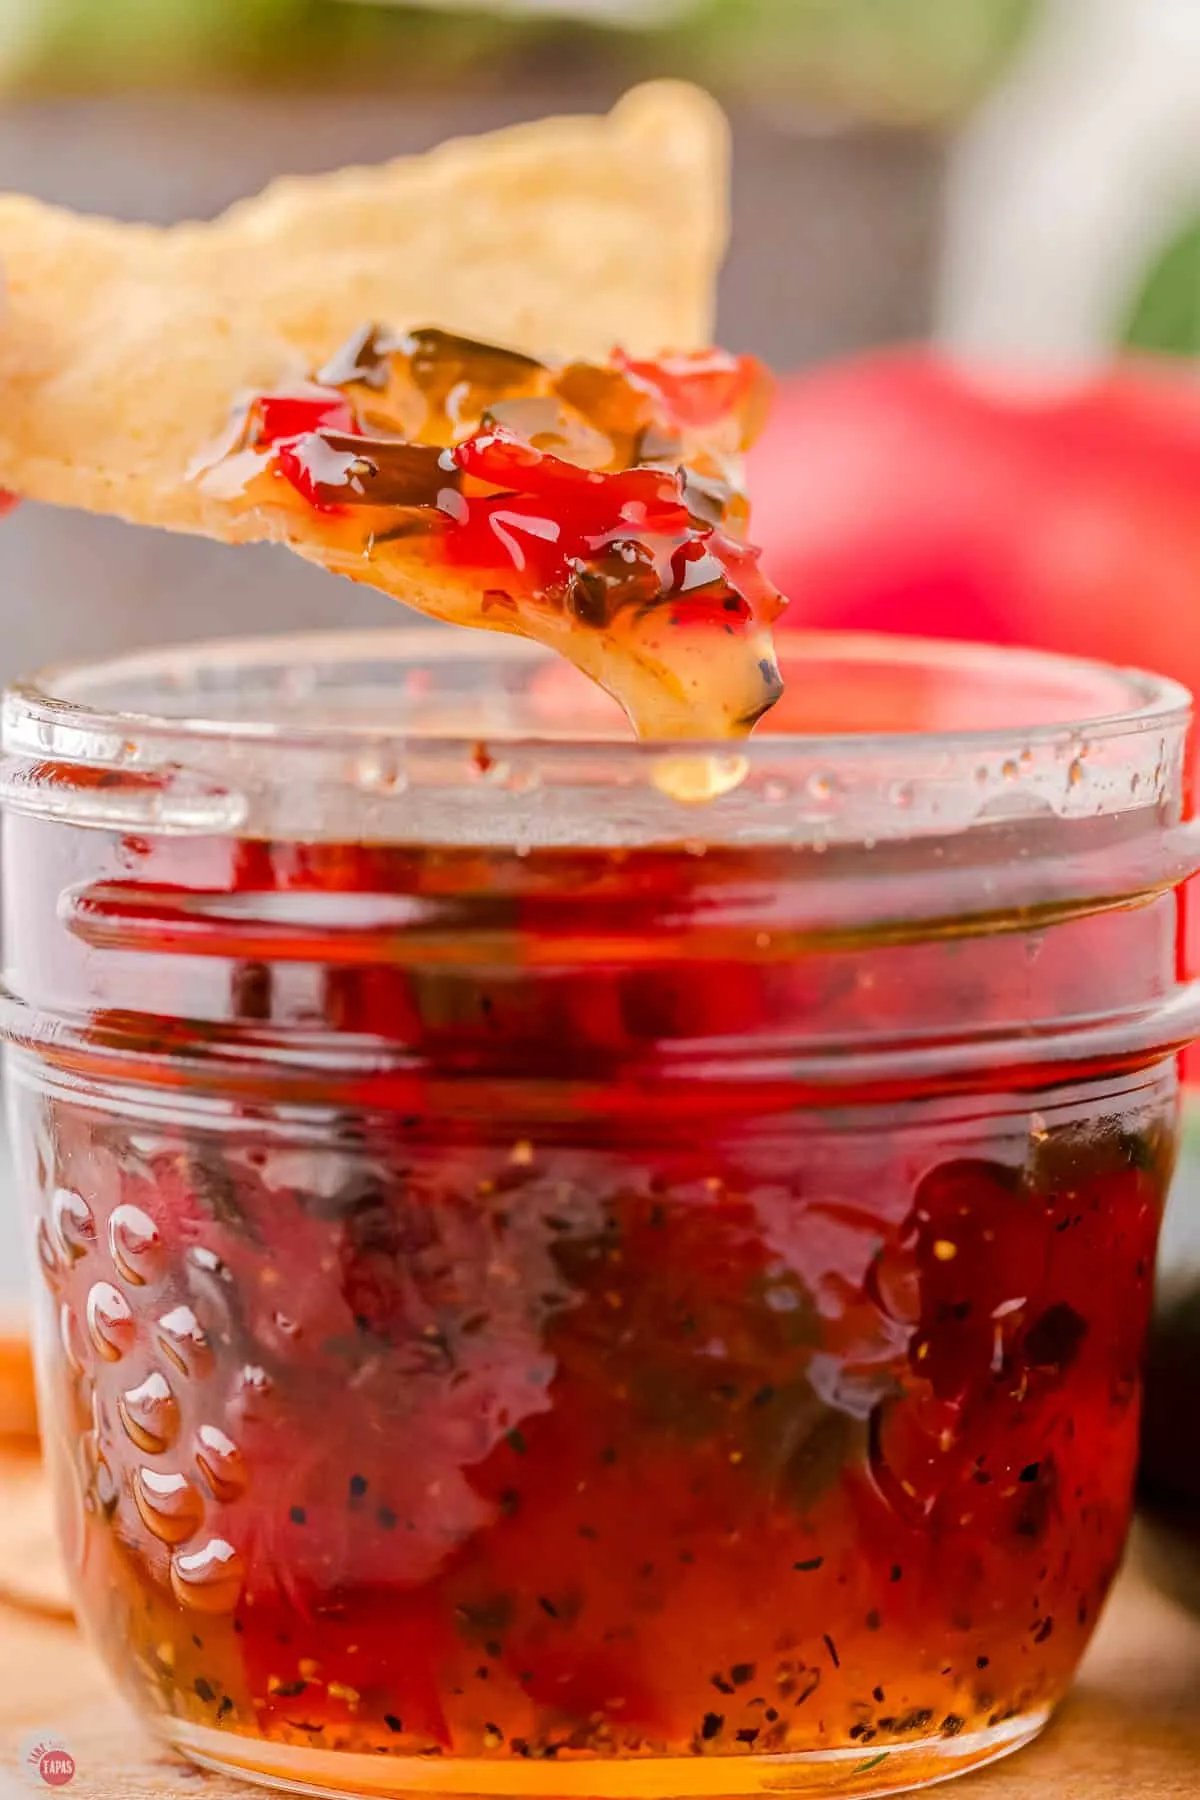 homemade red pepper jelly recipe without canning equipment